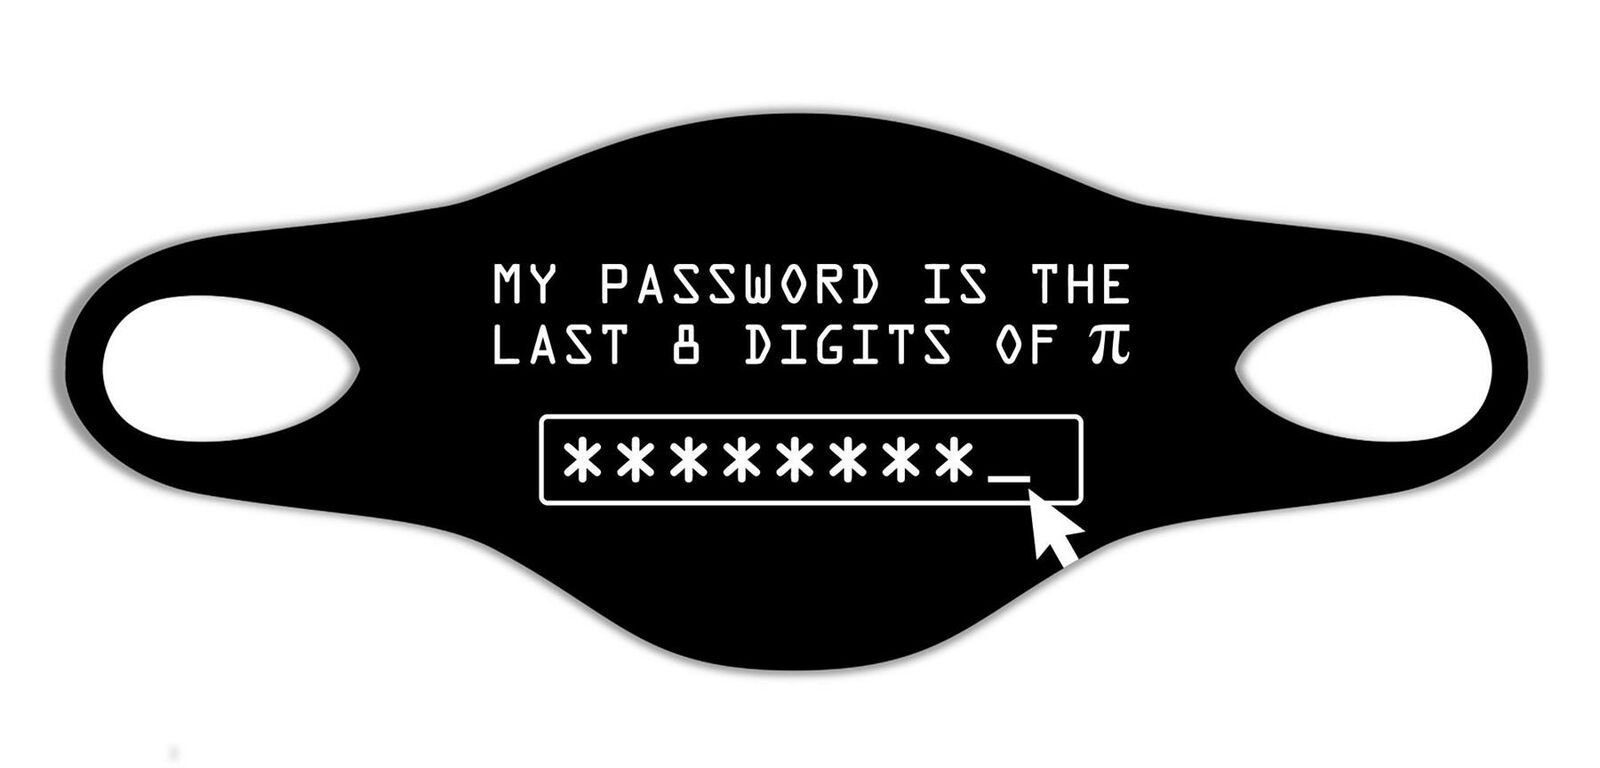 My Password Is The Last 8 Digits Of Pi Humor Joke Protective Wash soft Face Mask